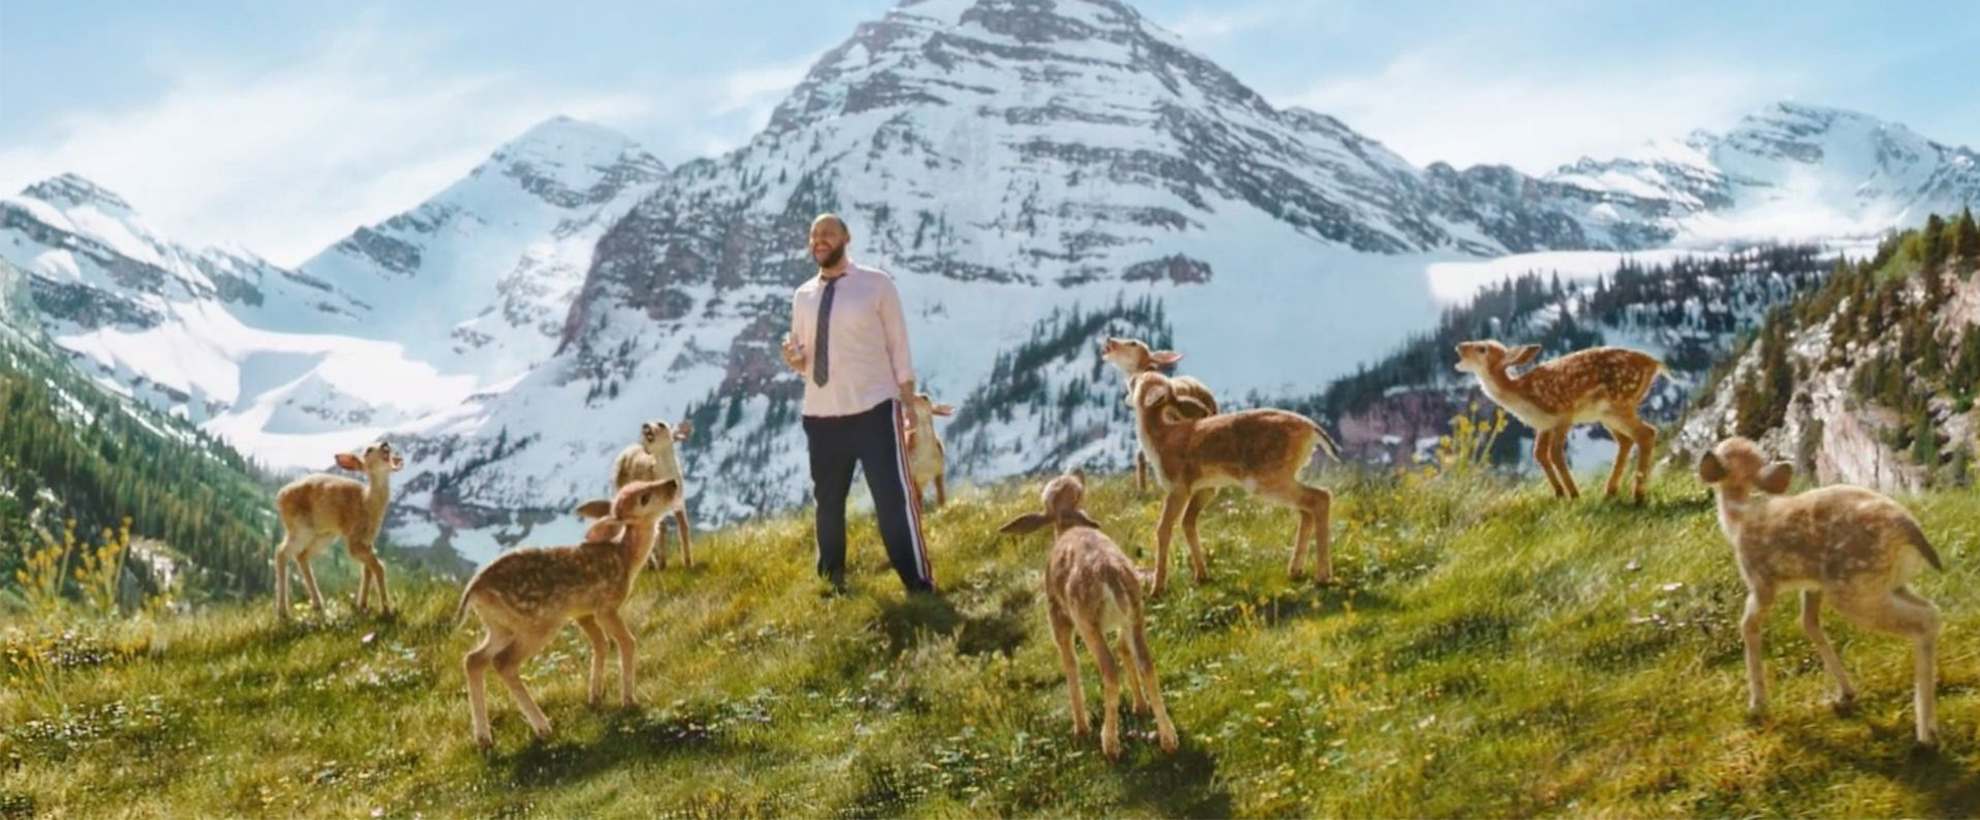 Man surrounded by dear standing in front of a mountain range 